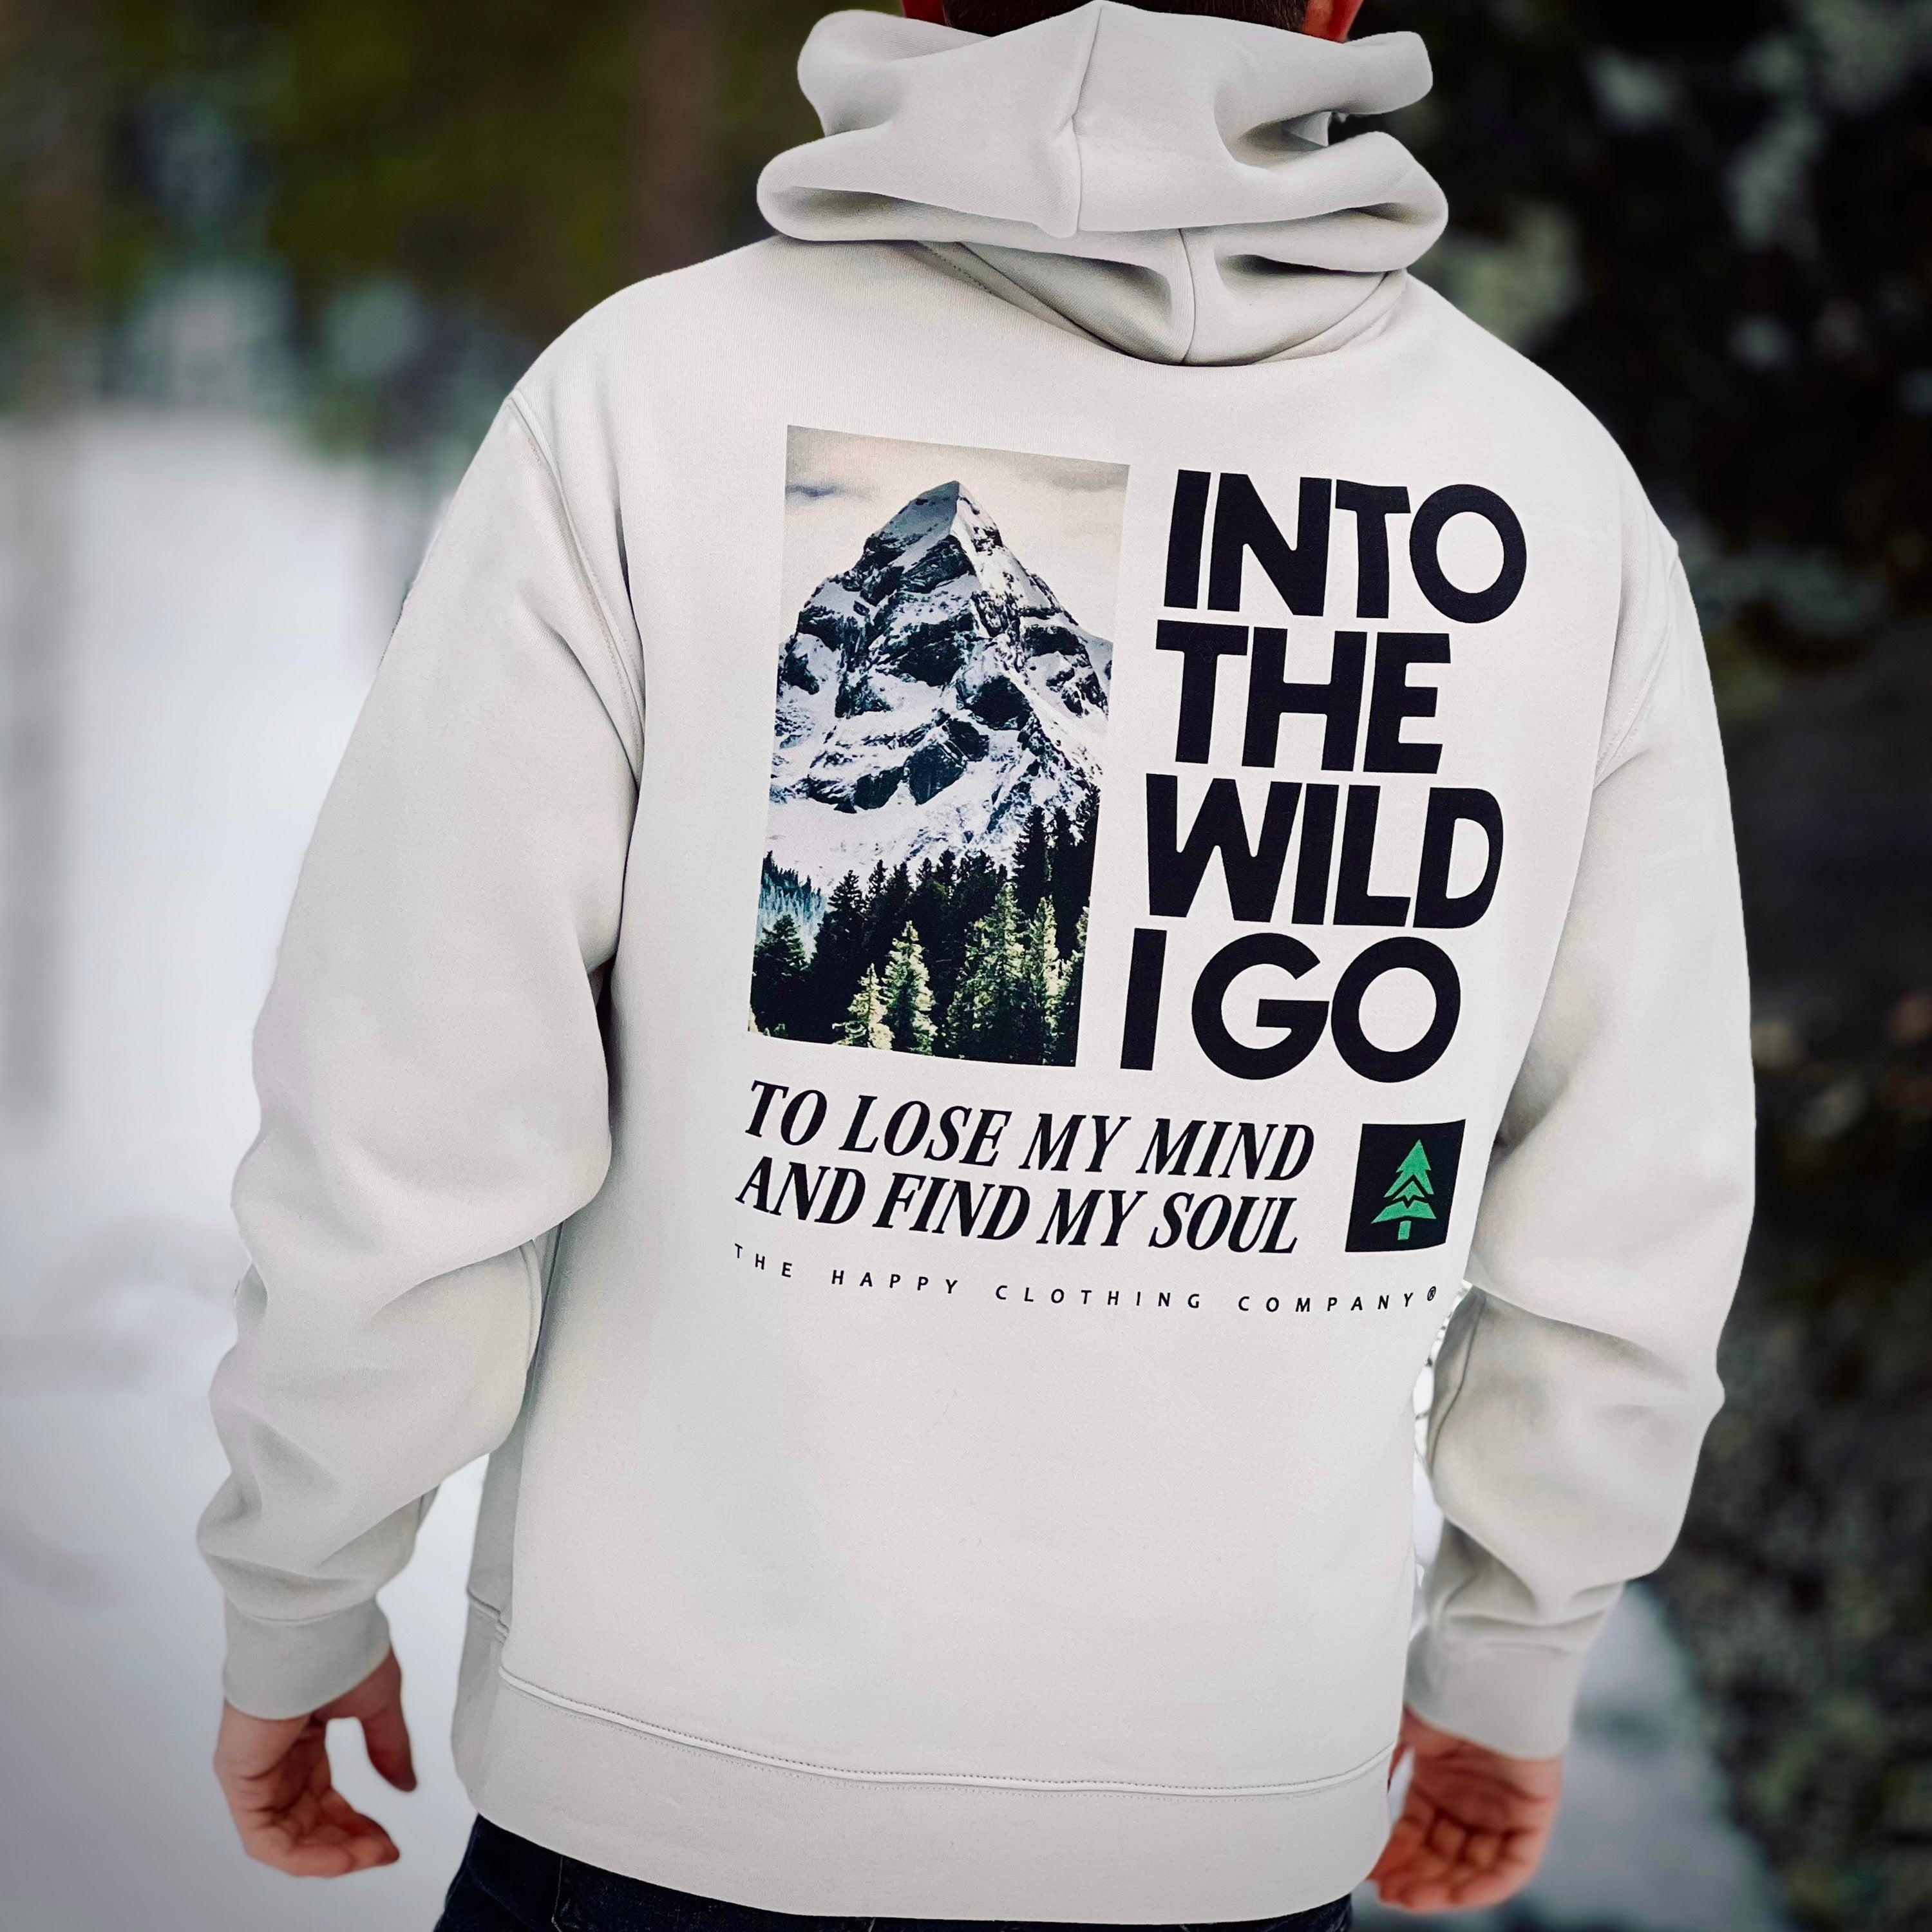 Into The Wild I Go Unisex Relaxed Hoodie - The Happy Clothing Company